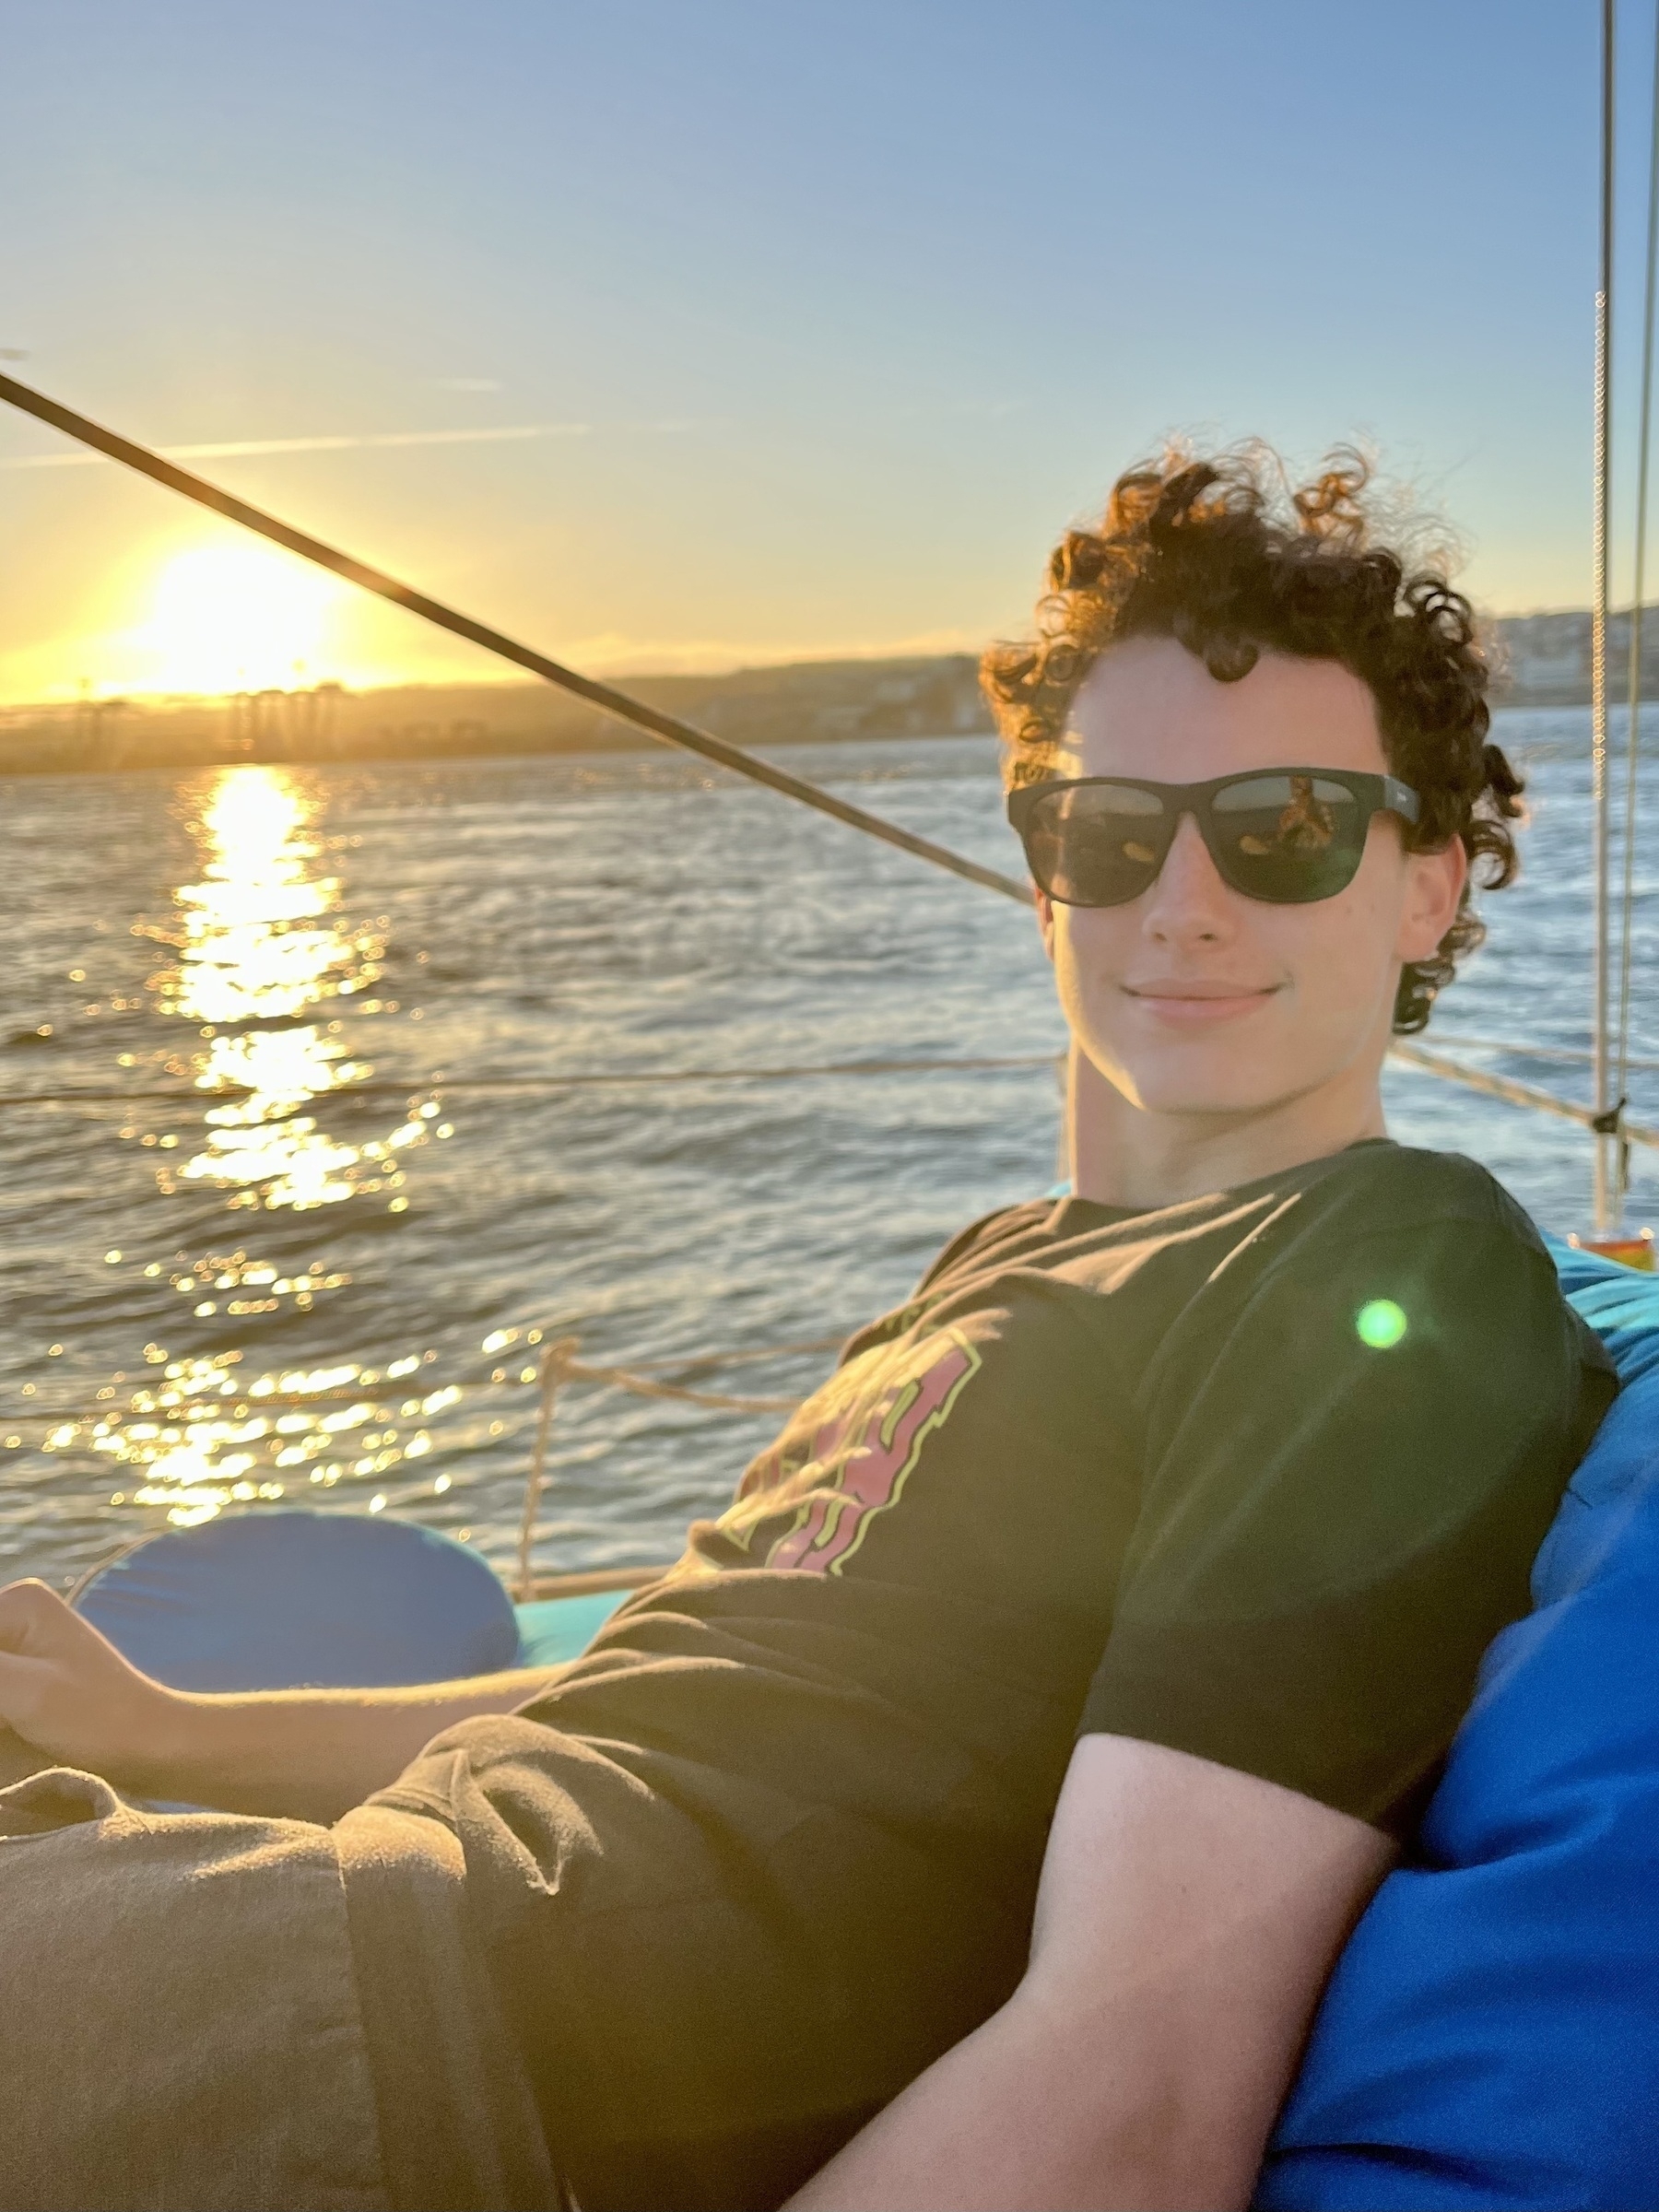 A person with sunglasses is sitting on a boat, relaxed, with a sunset and shimmering water in the background.